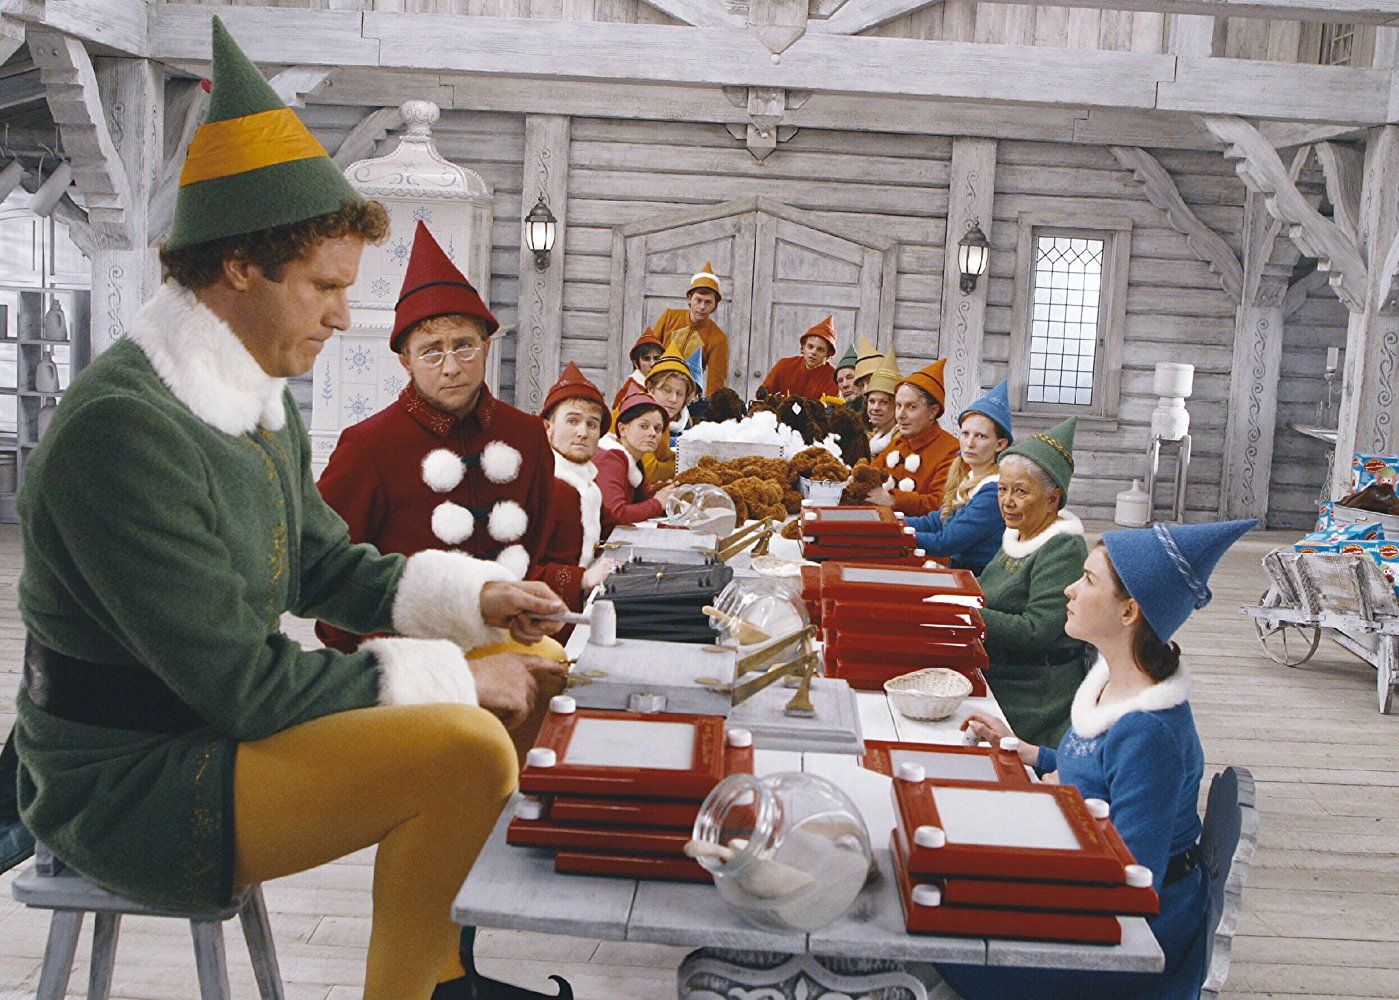 10 Facts About "Elf" You'll Love More Than Maple Syrup